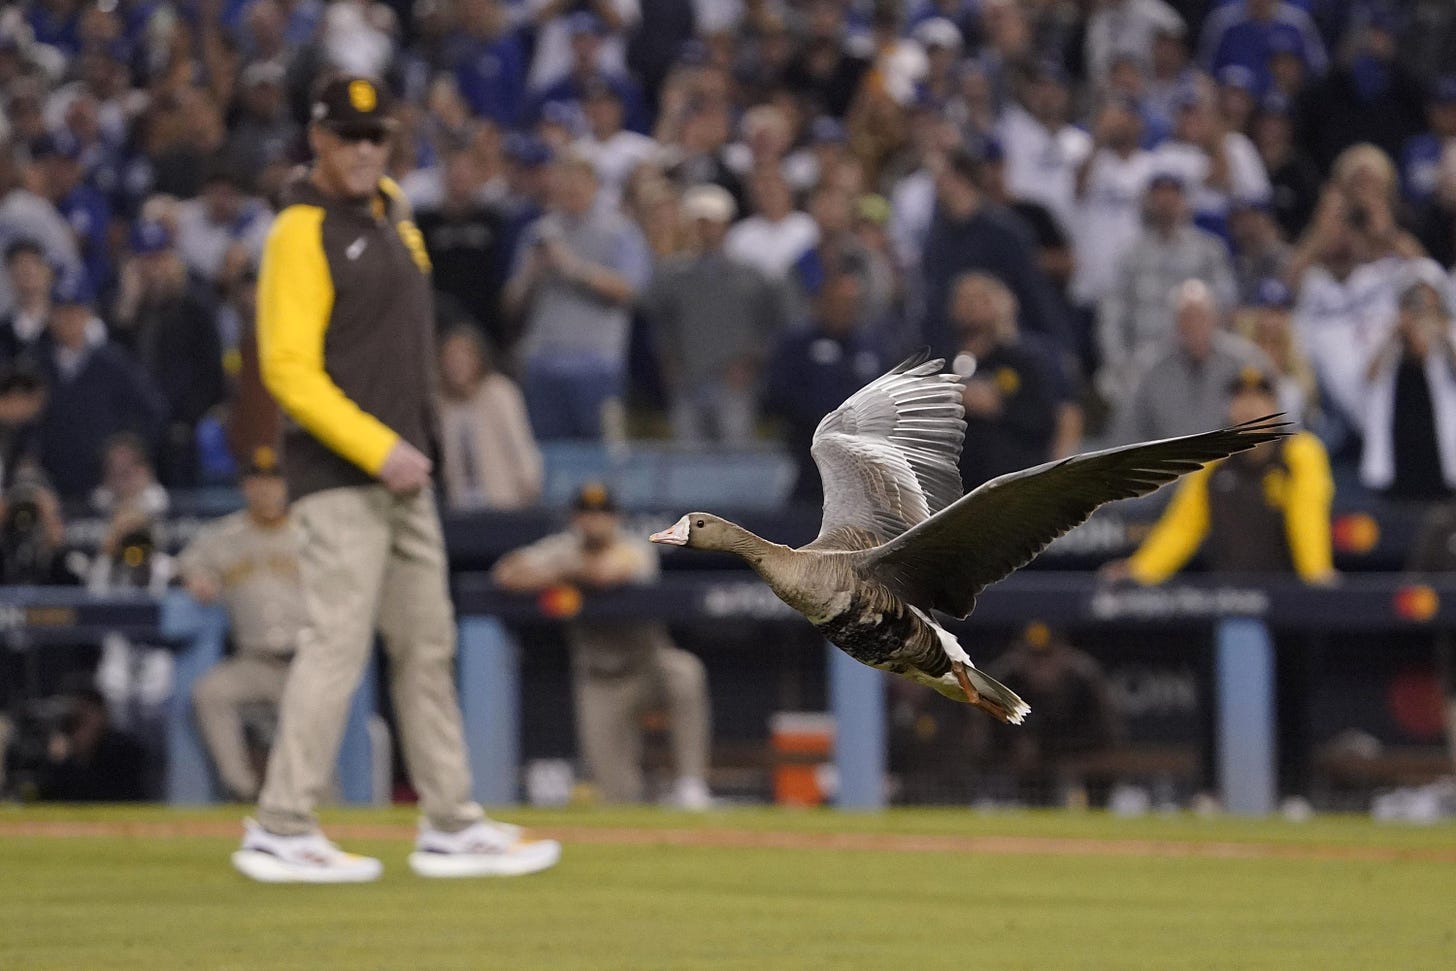 Goose on loose causes delay at Padres-Dodgers playoff game | AP News